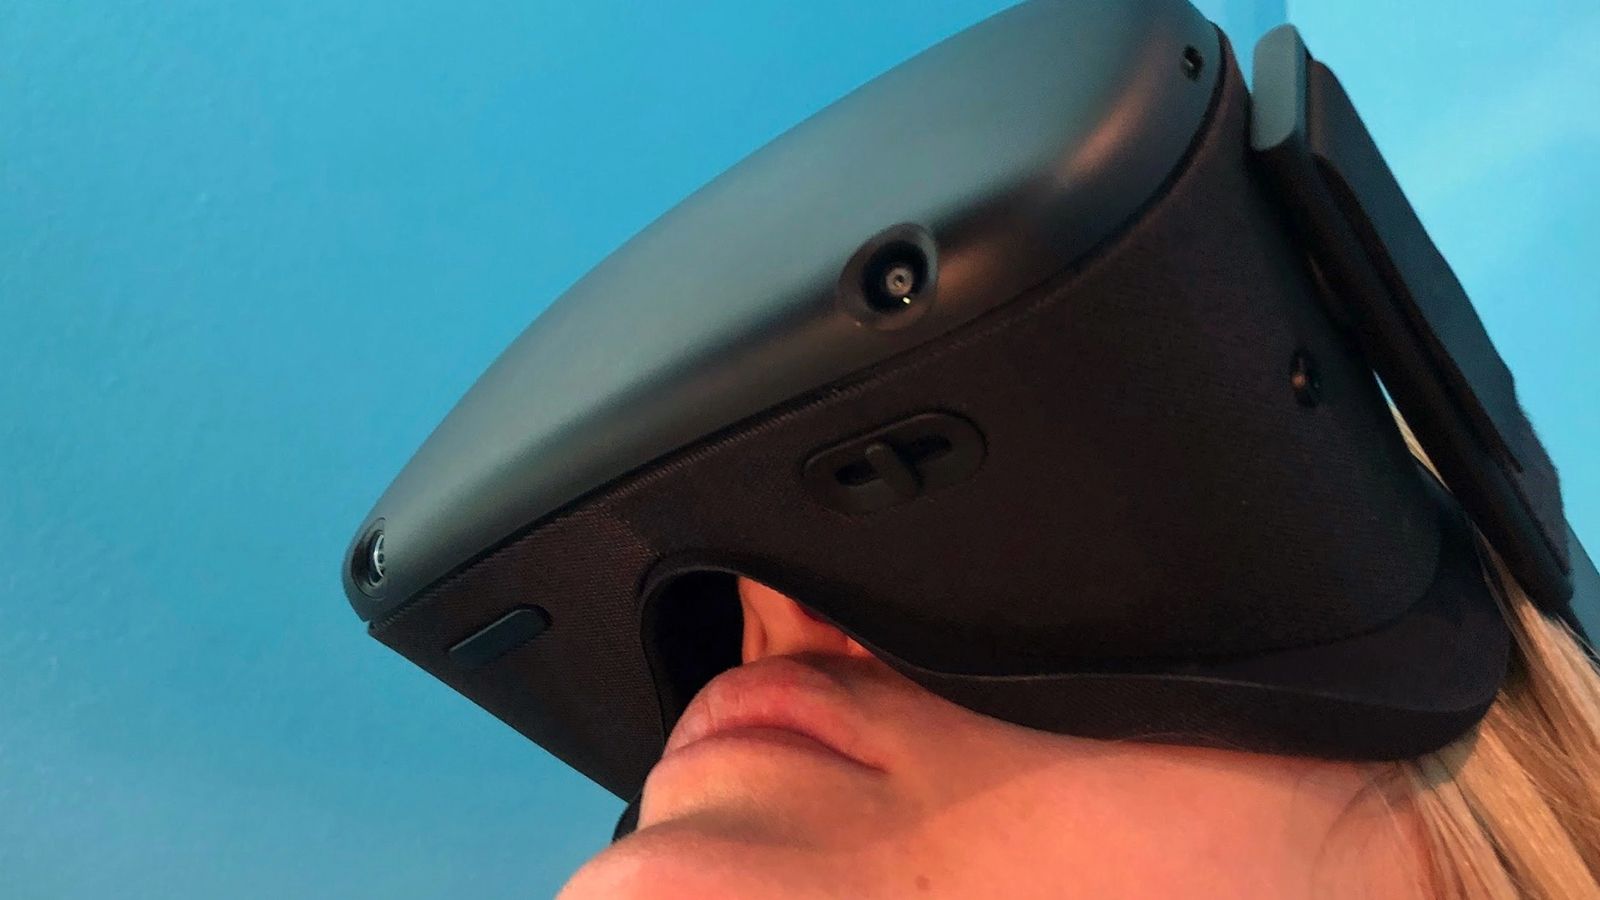 New Oculus Quest 2 leaks add more image and a launch date